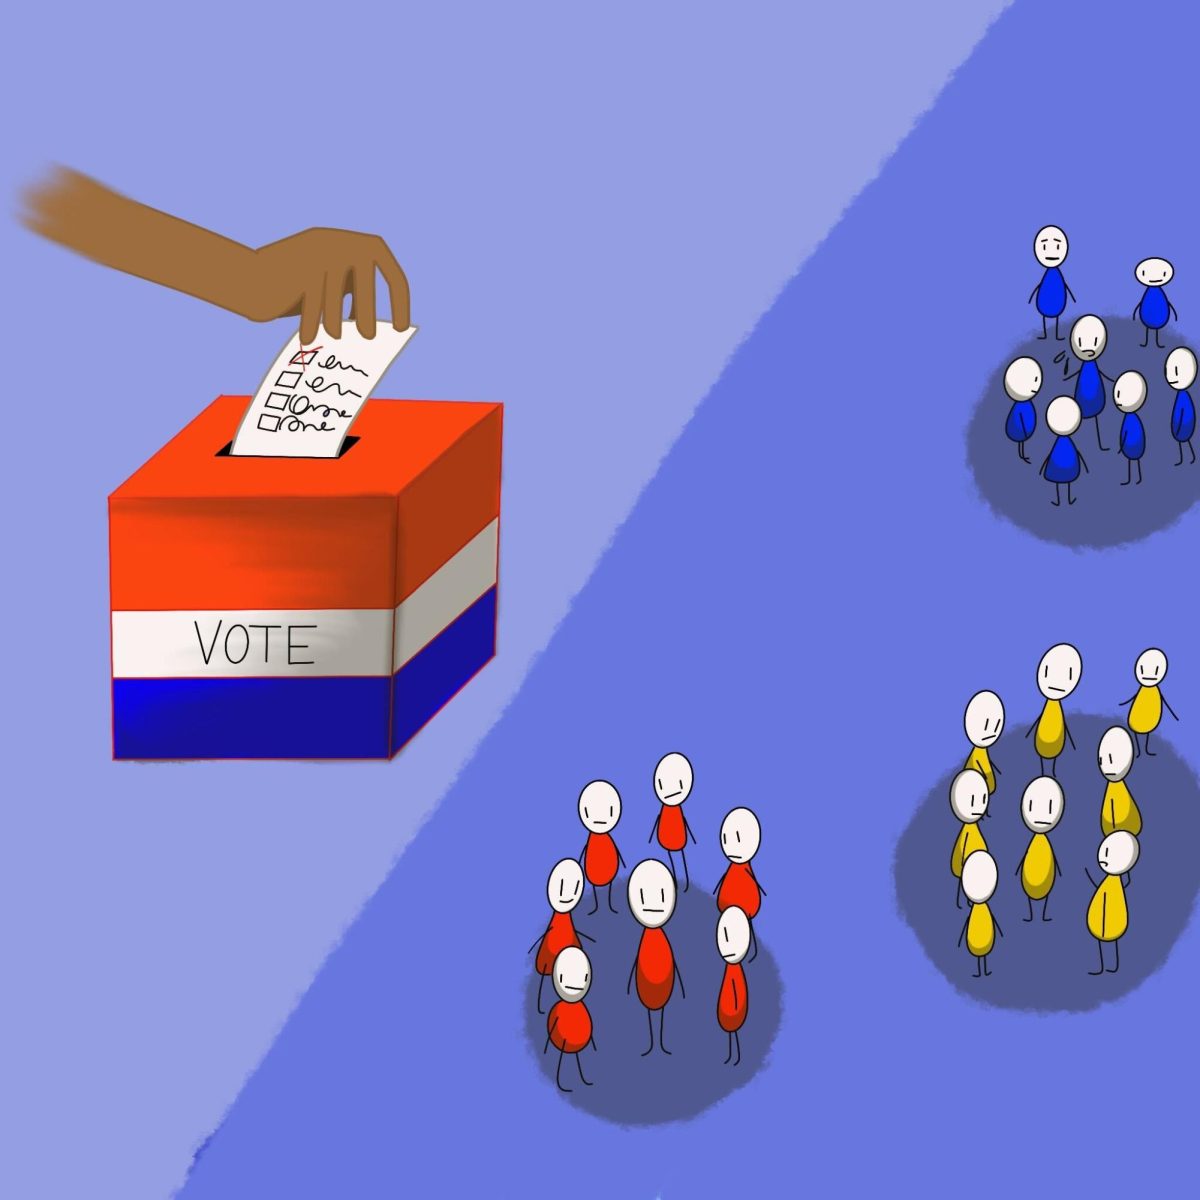 In a primary, voters simply select the candidate they prefer on a ballot.


In a caucus, after hearing candidate representatives speak, voters move to areas of the room for the candidate they prefer. In the end, a final percentage of votes for each candidate is determined.
